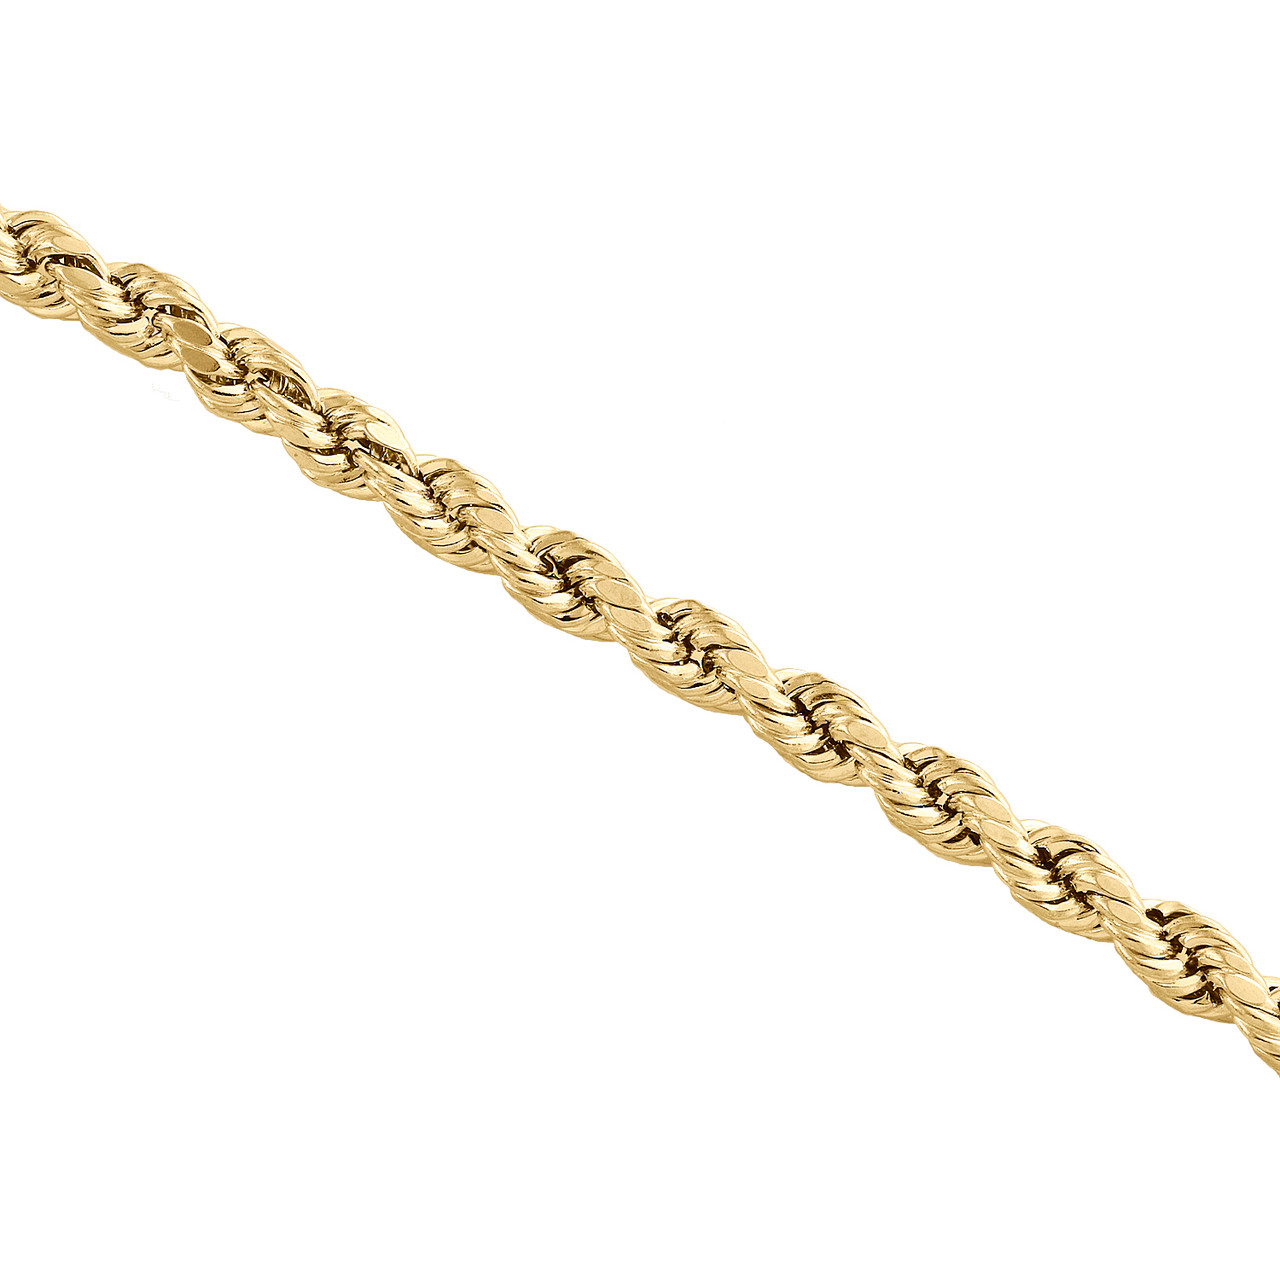 10K Yellow Gold 4mm Hollow Diamond Cut Rope Link Bracelet Lobster Clasp 8-9 Inch